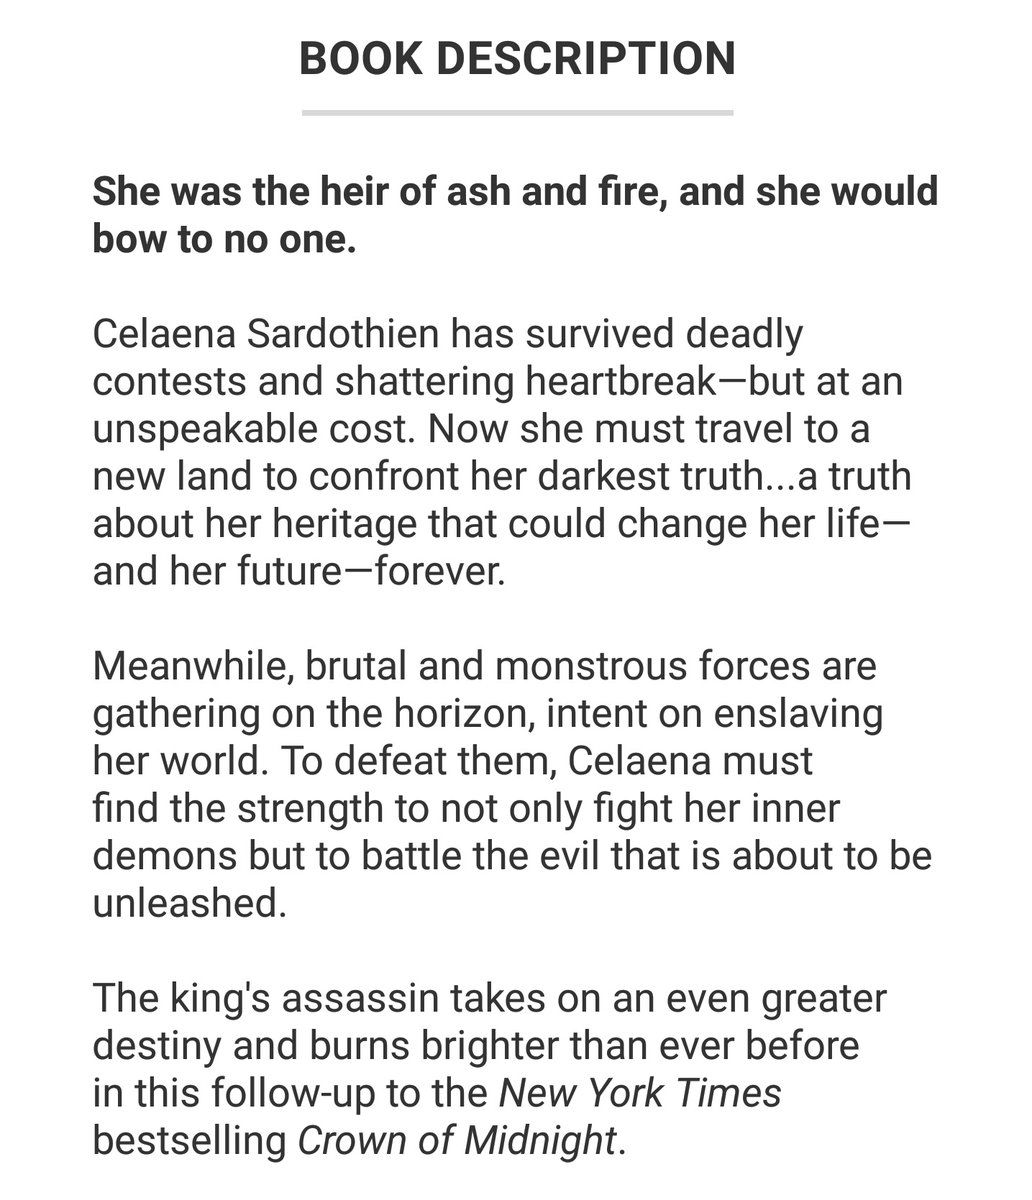 BLURB(do not read this if you haven't read the previous books in the series: the assassin's blade, throne of glass and crown of midnight)